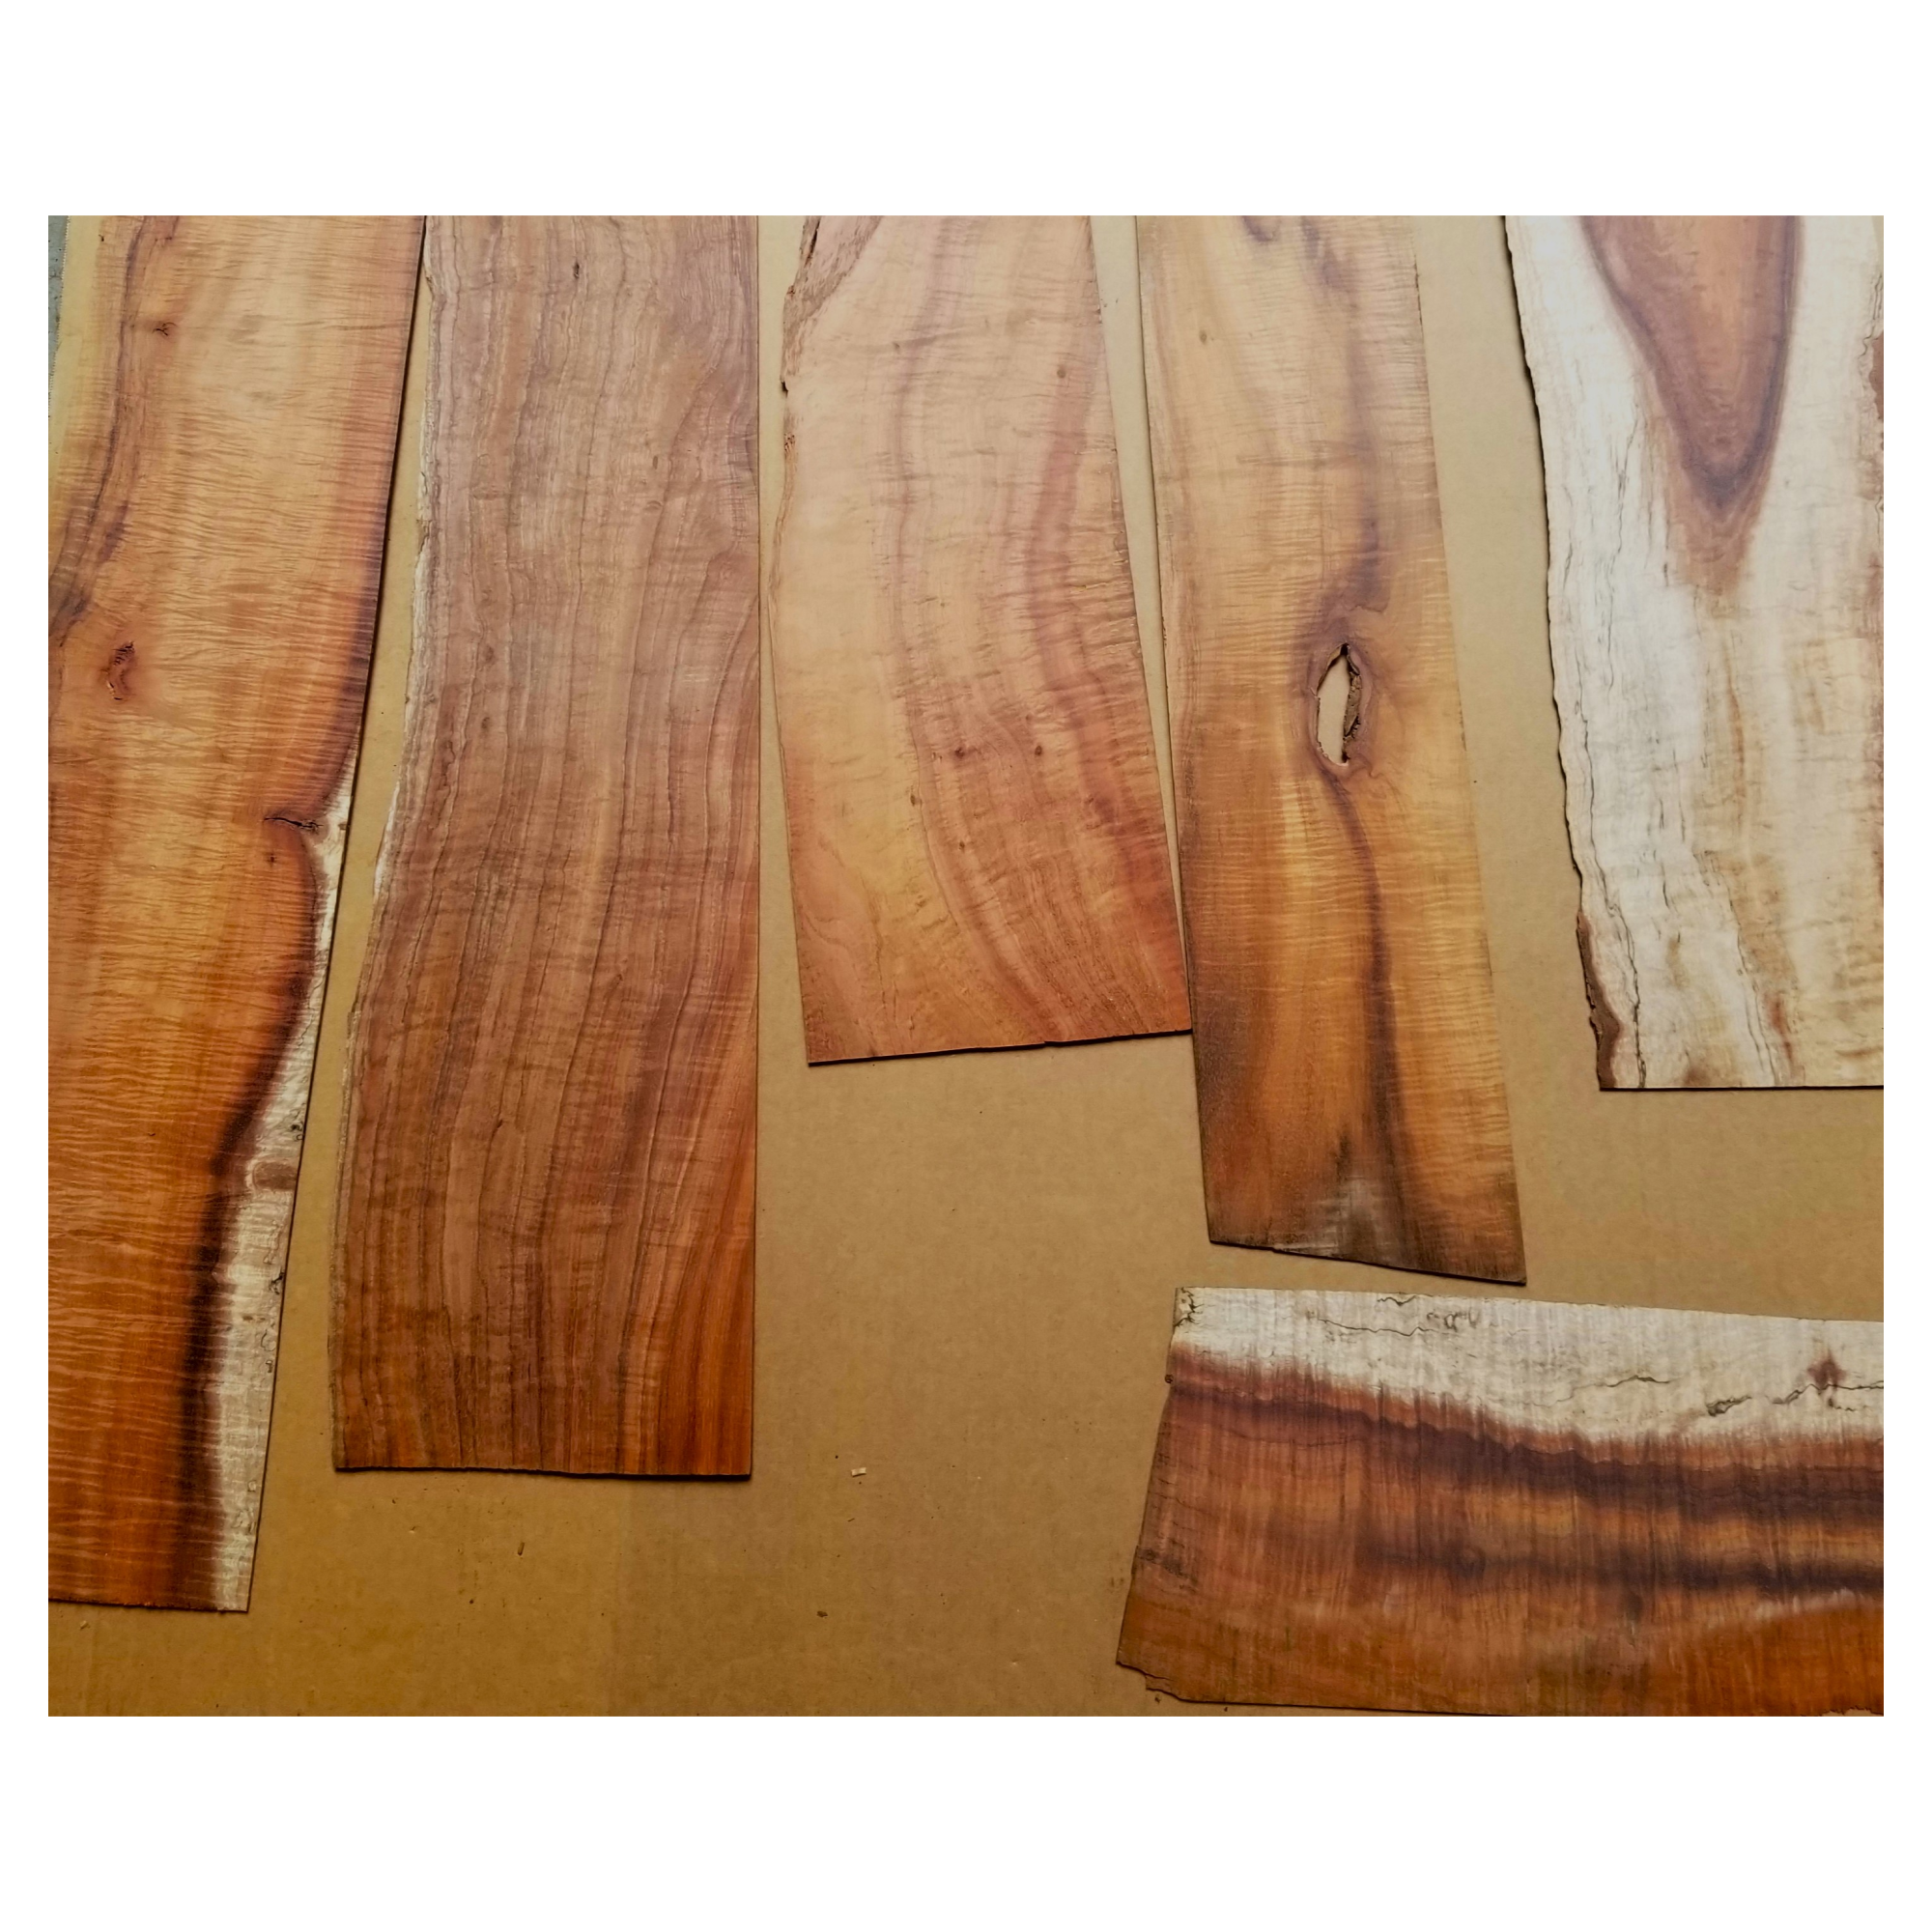 Random selection of curly and plain koa boards with multiple colors and shapes.